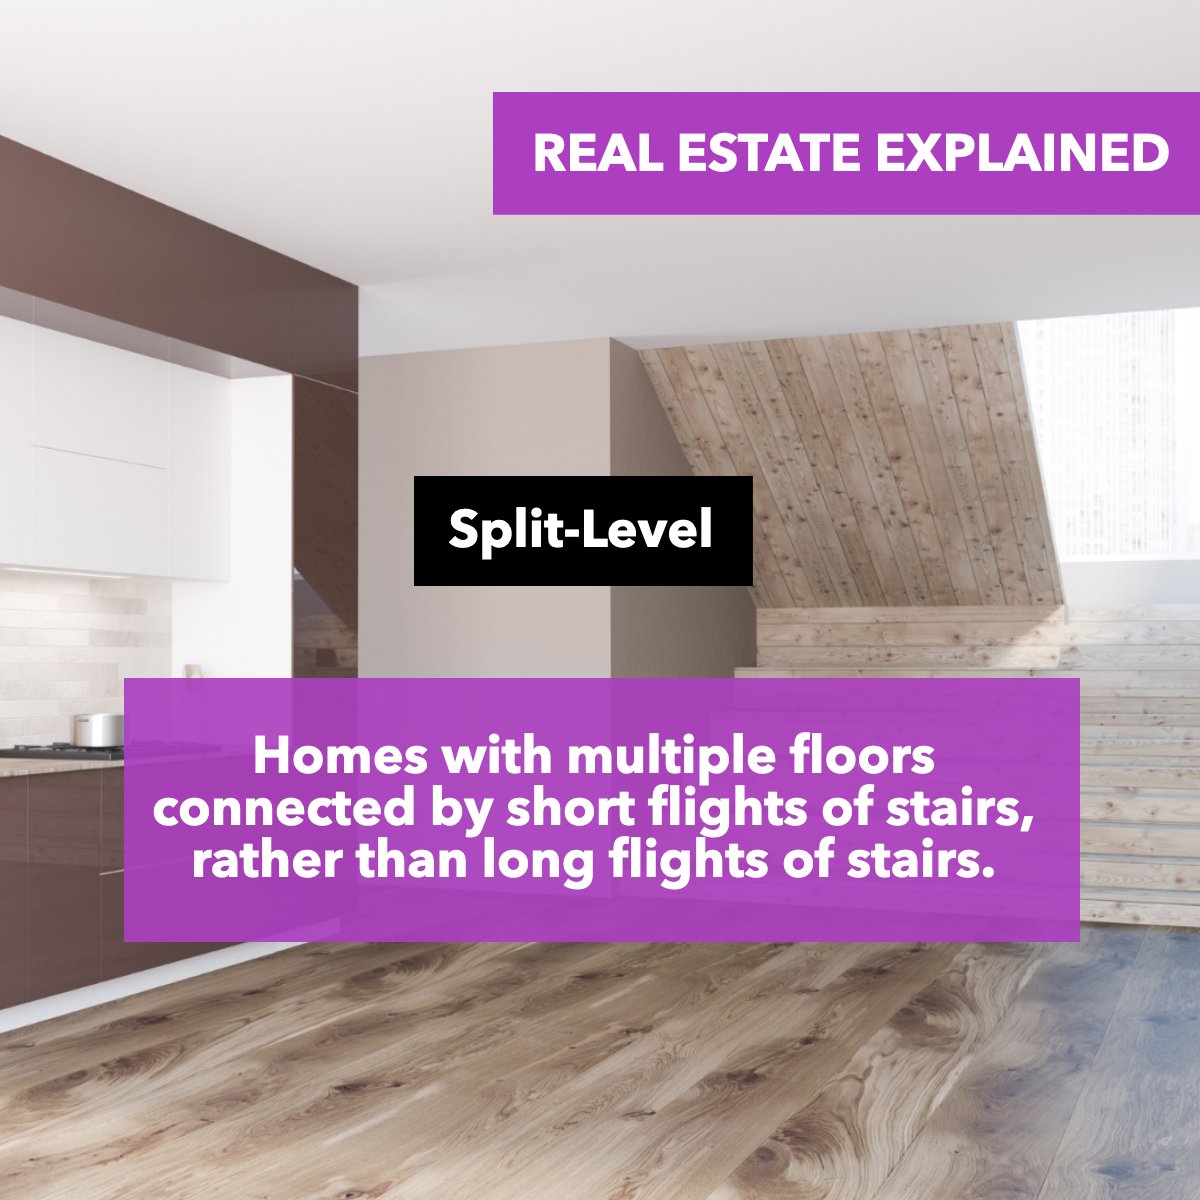 Did you know what a Spit-Level is? 🤔

Is this the type of house that you like?

#splitlevelremodel #splitlevelhome #splitleveldesign
 #washingtonrealestate #washingtonrealtor #swwashingtonrealestate #sellinghomes #buyinghomes #exprealtor #realestateinvesting